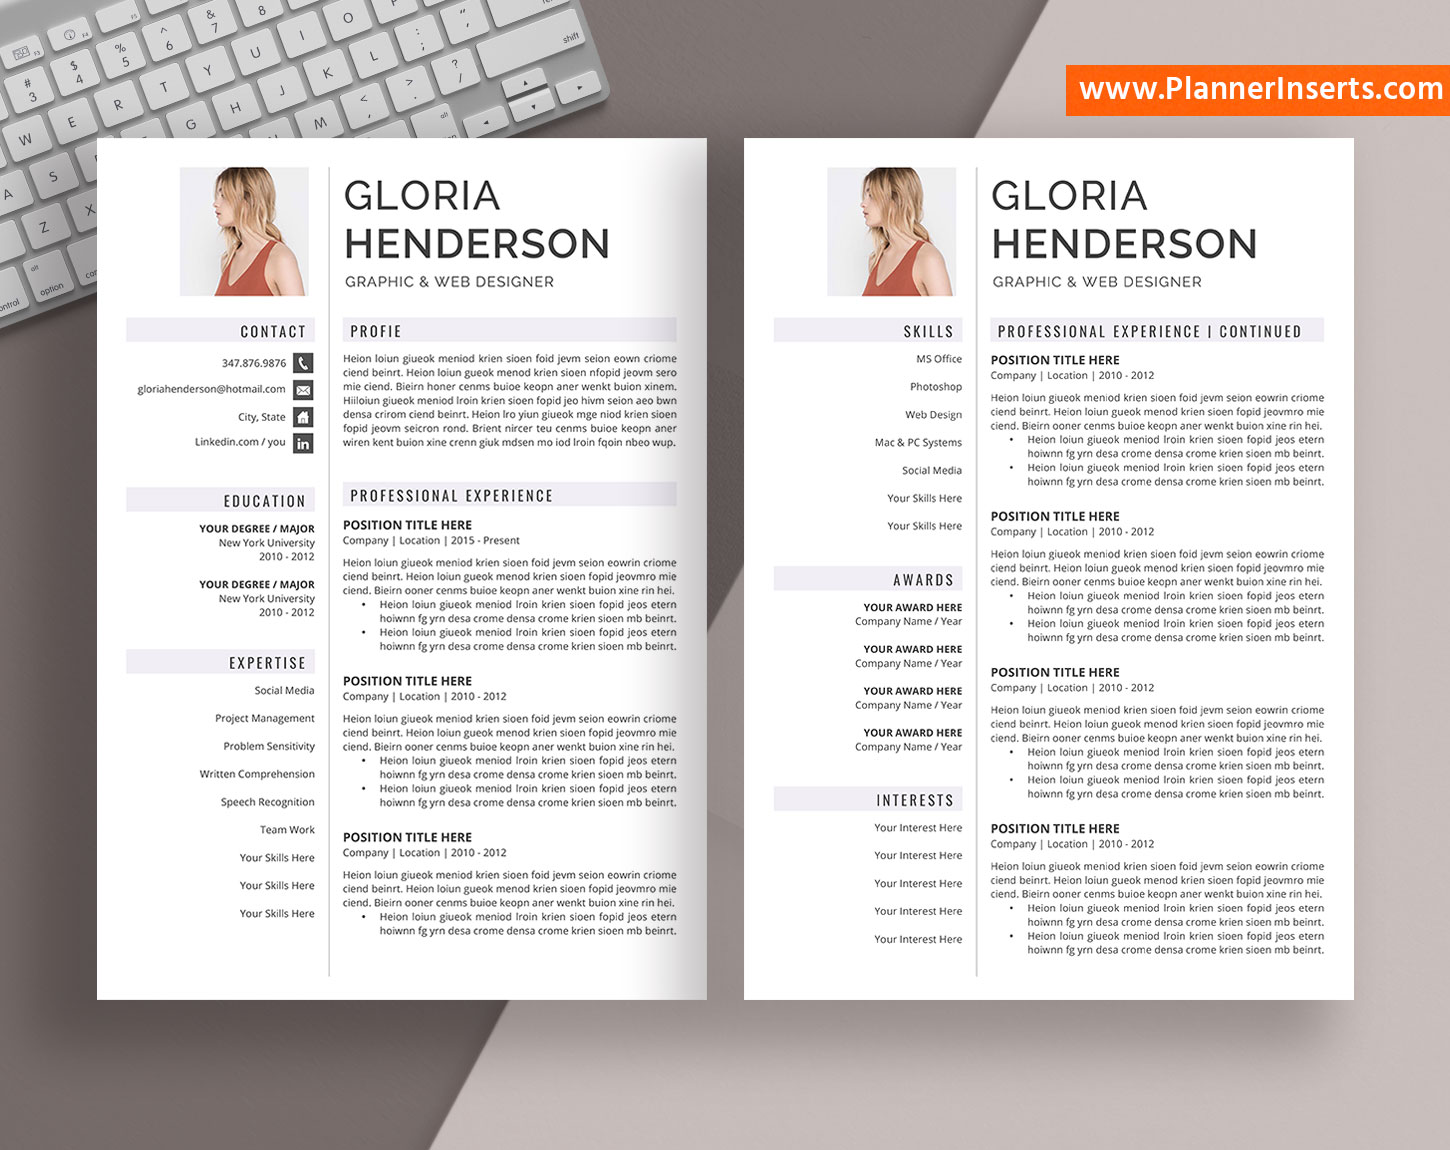 Back Office Job Resume Format - Office Clerk Resume—Examples and 25+ Writing Tips : Find the best back office executive resume examples to help you improve your own resume.